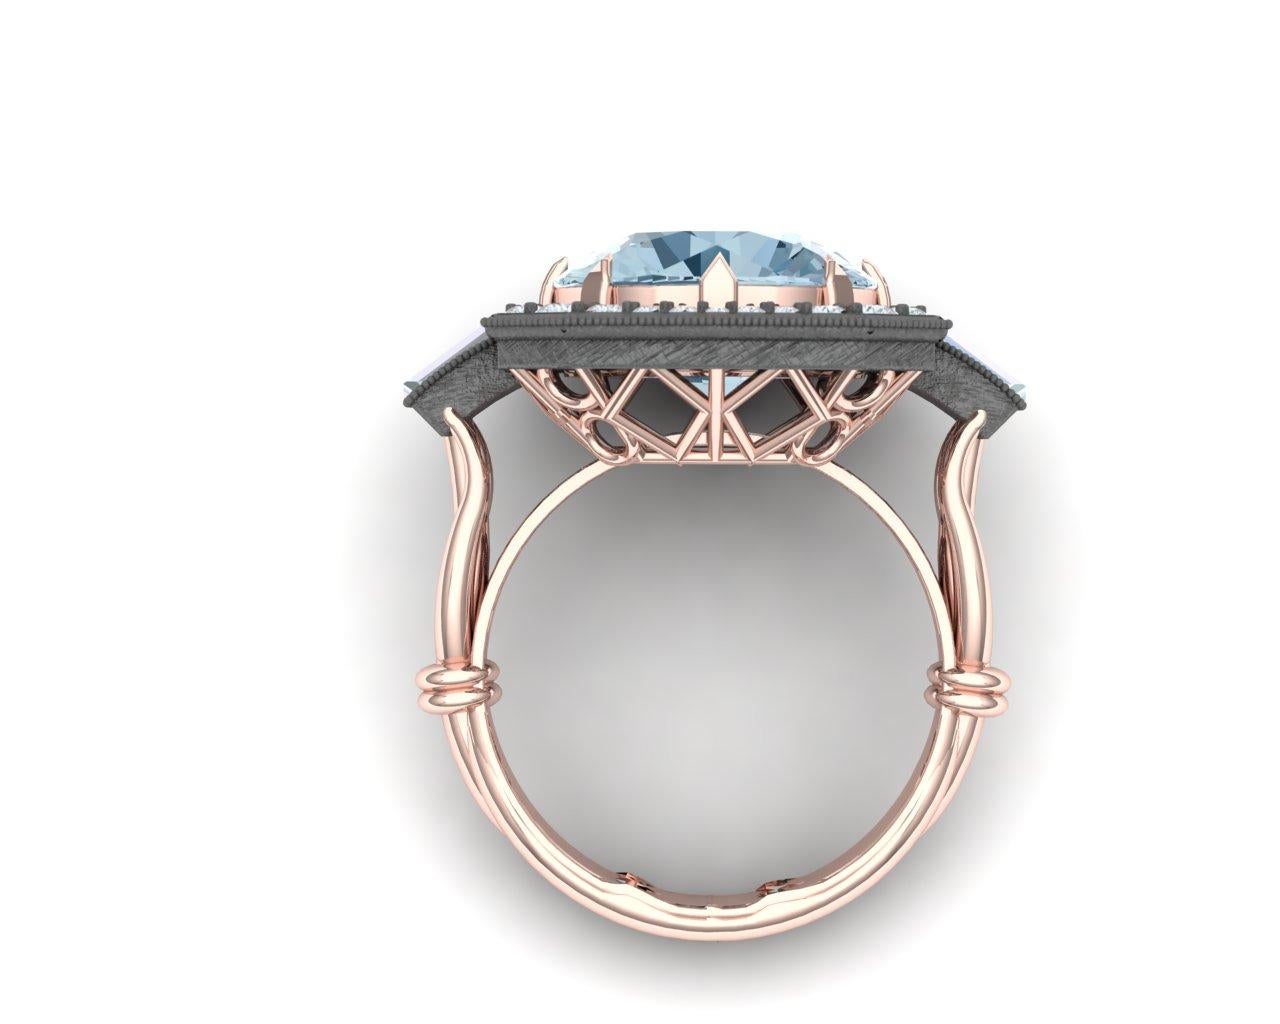 A stunning combination of steel blue and grey with the warmth of rose gold makes this ring one to stand out.  The center stone on this ring weighs apprx. 4 carats and has a stunning blue grey color.  The center stone is a pastel blue which contrasts